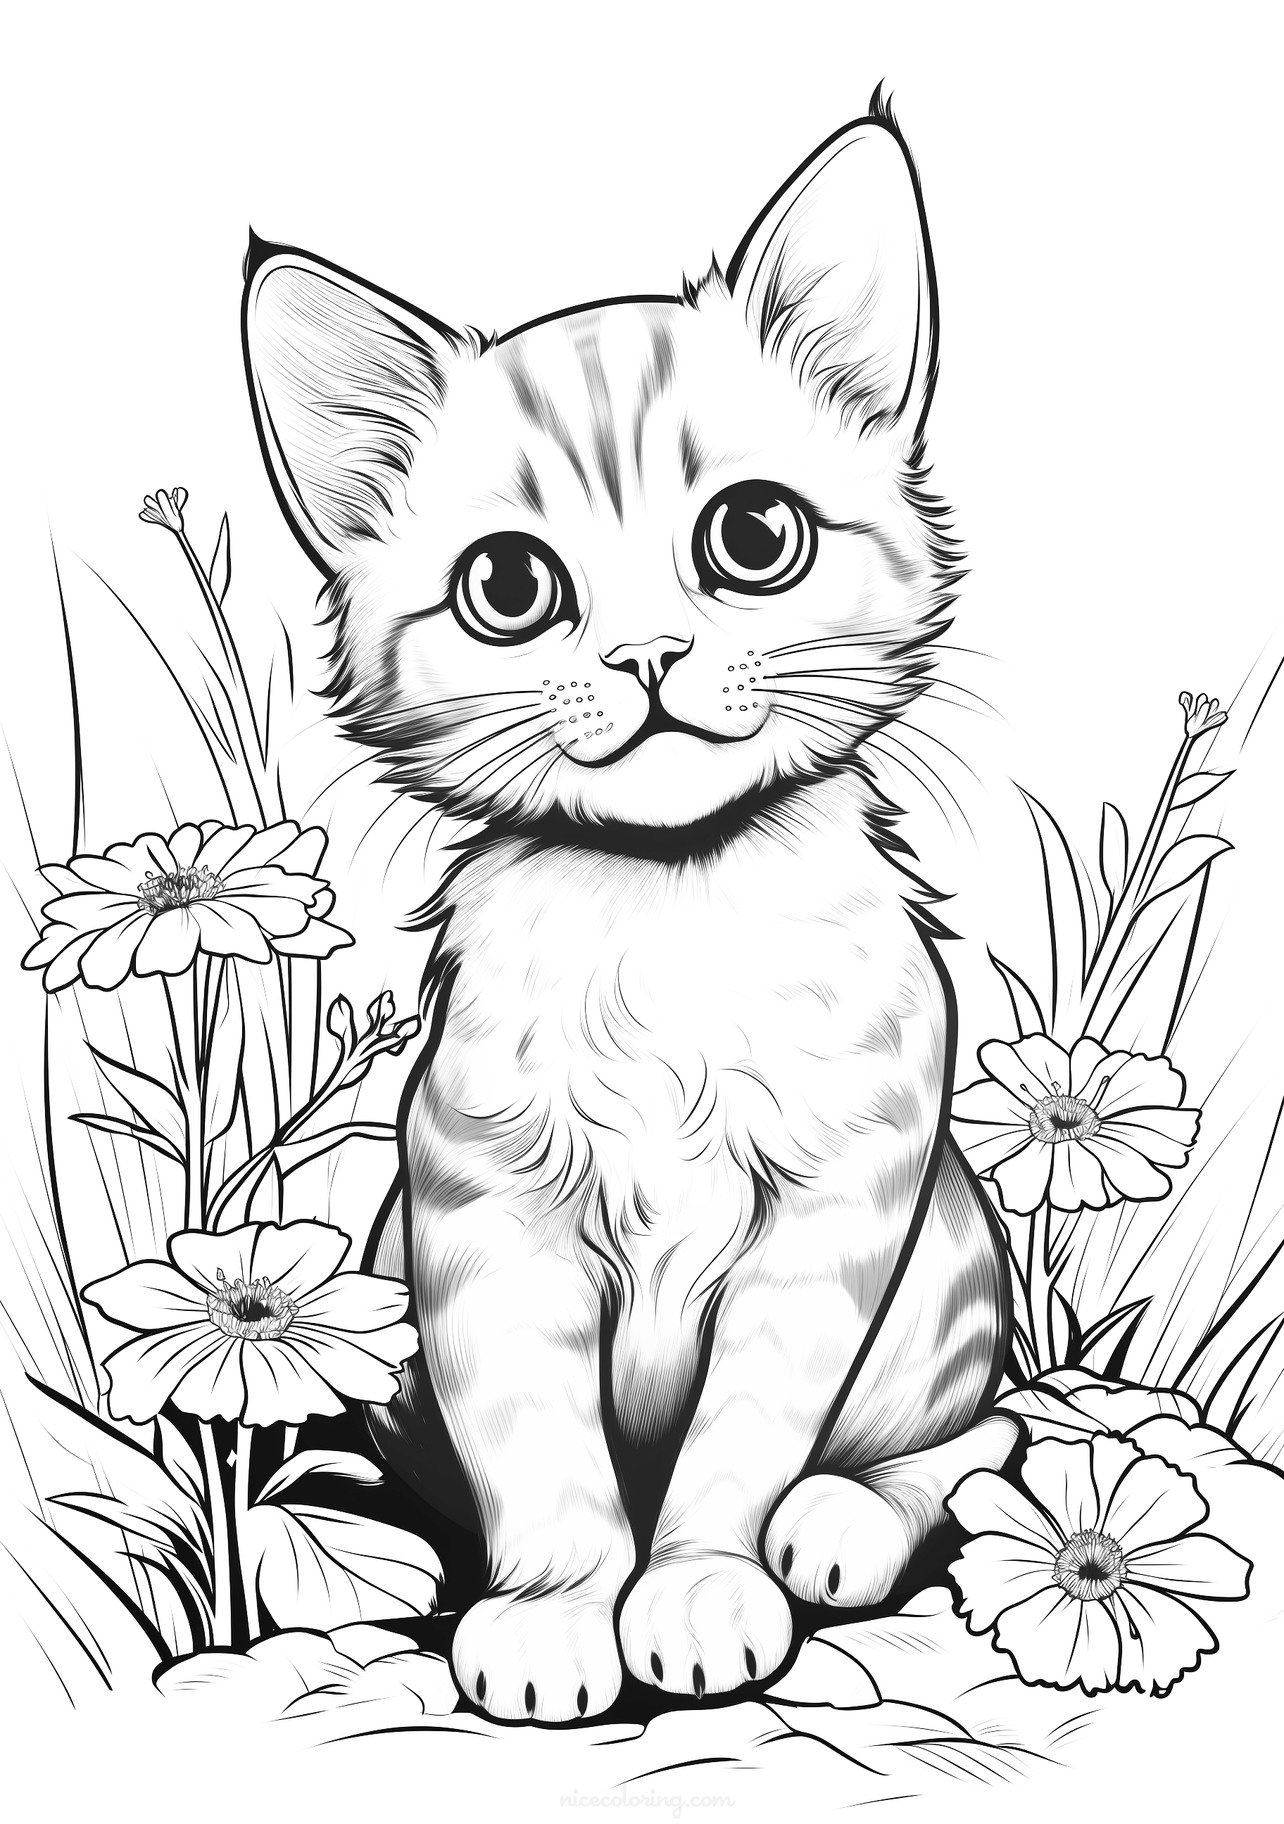 Adorable cat sitting among flowers ready for coloring